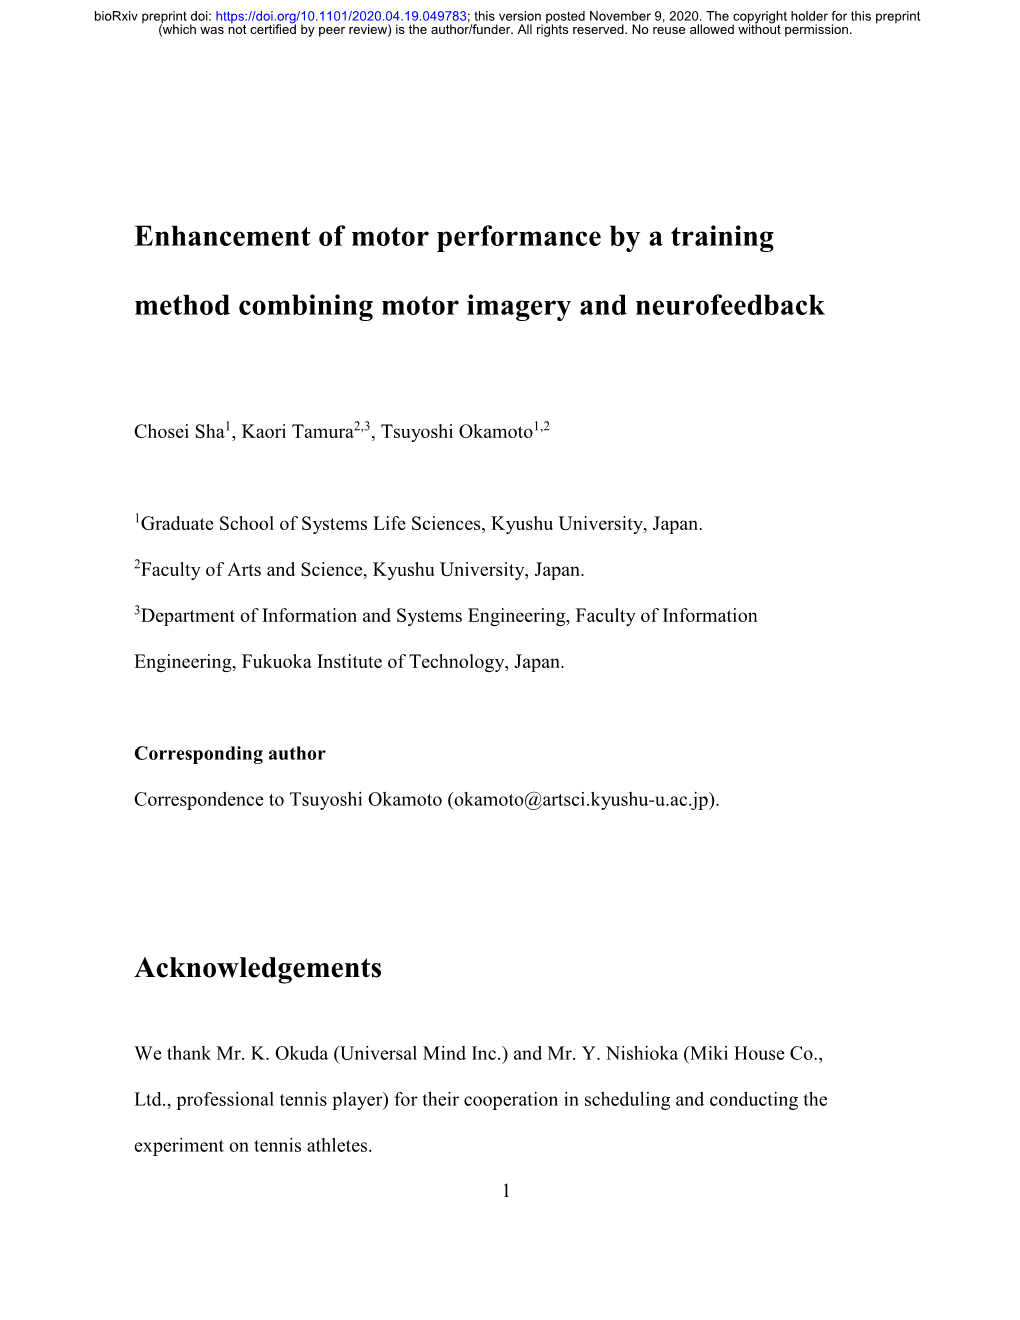 Enhancement of Motor Performance by a Training Method Combining Motor Imagery and Neurofeedback Acknowledgements